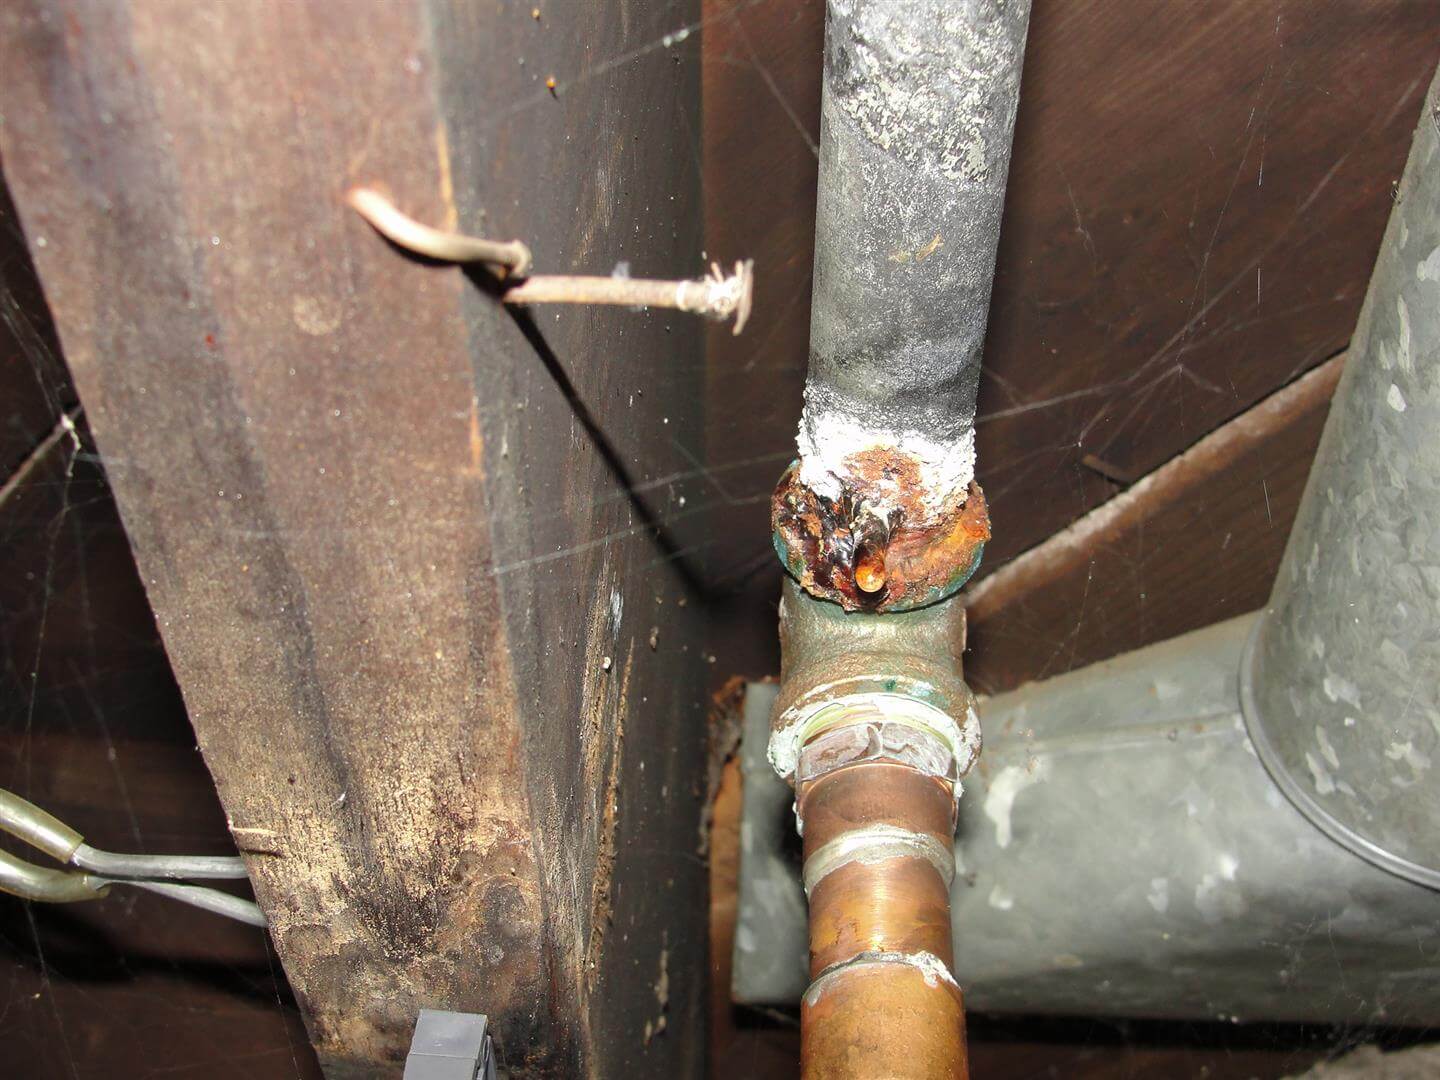 Leaking galvanized | Is it Time For New Pipes?